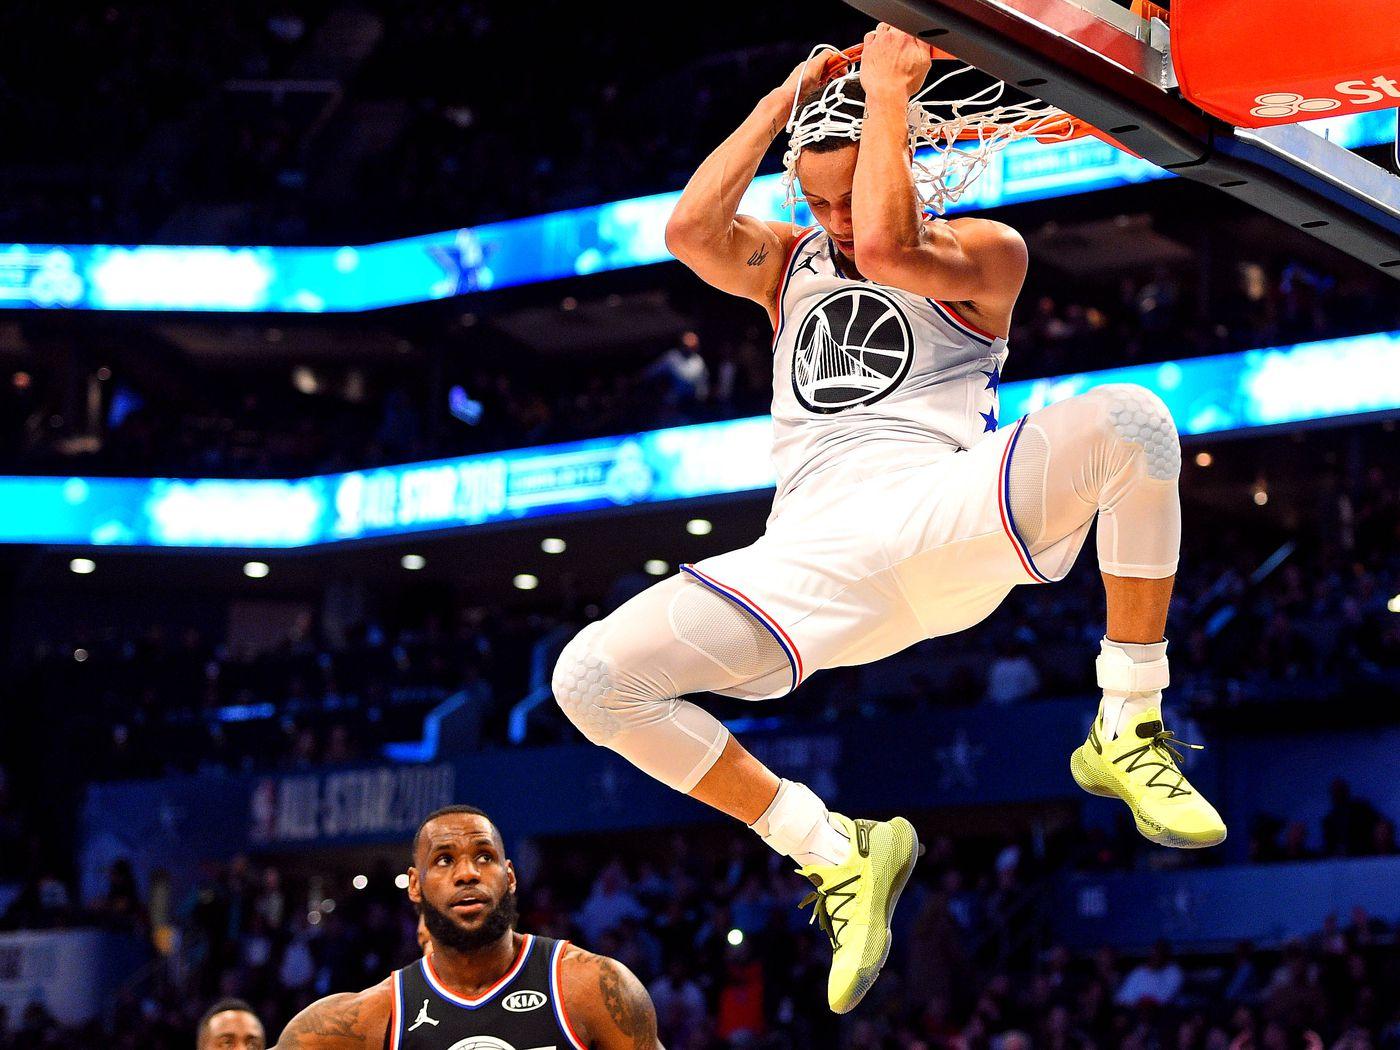 Stephen Curry's All Star Game Ending Dunk Shocked Everyone